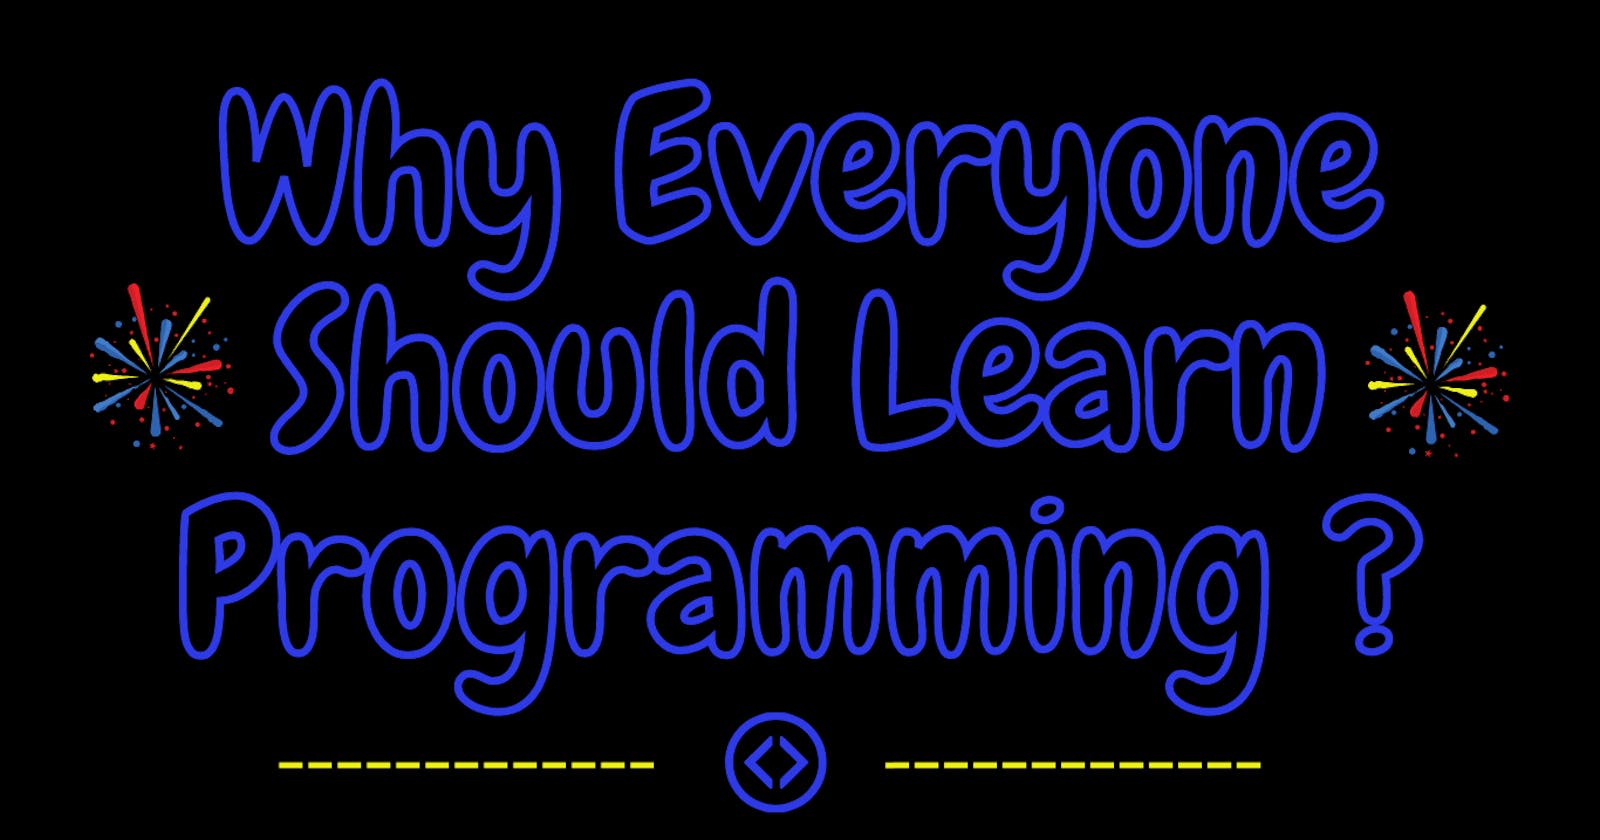 Why Everyone Should Learn Programming?